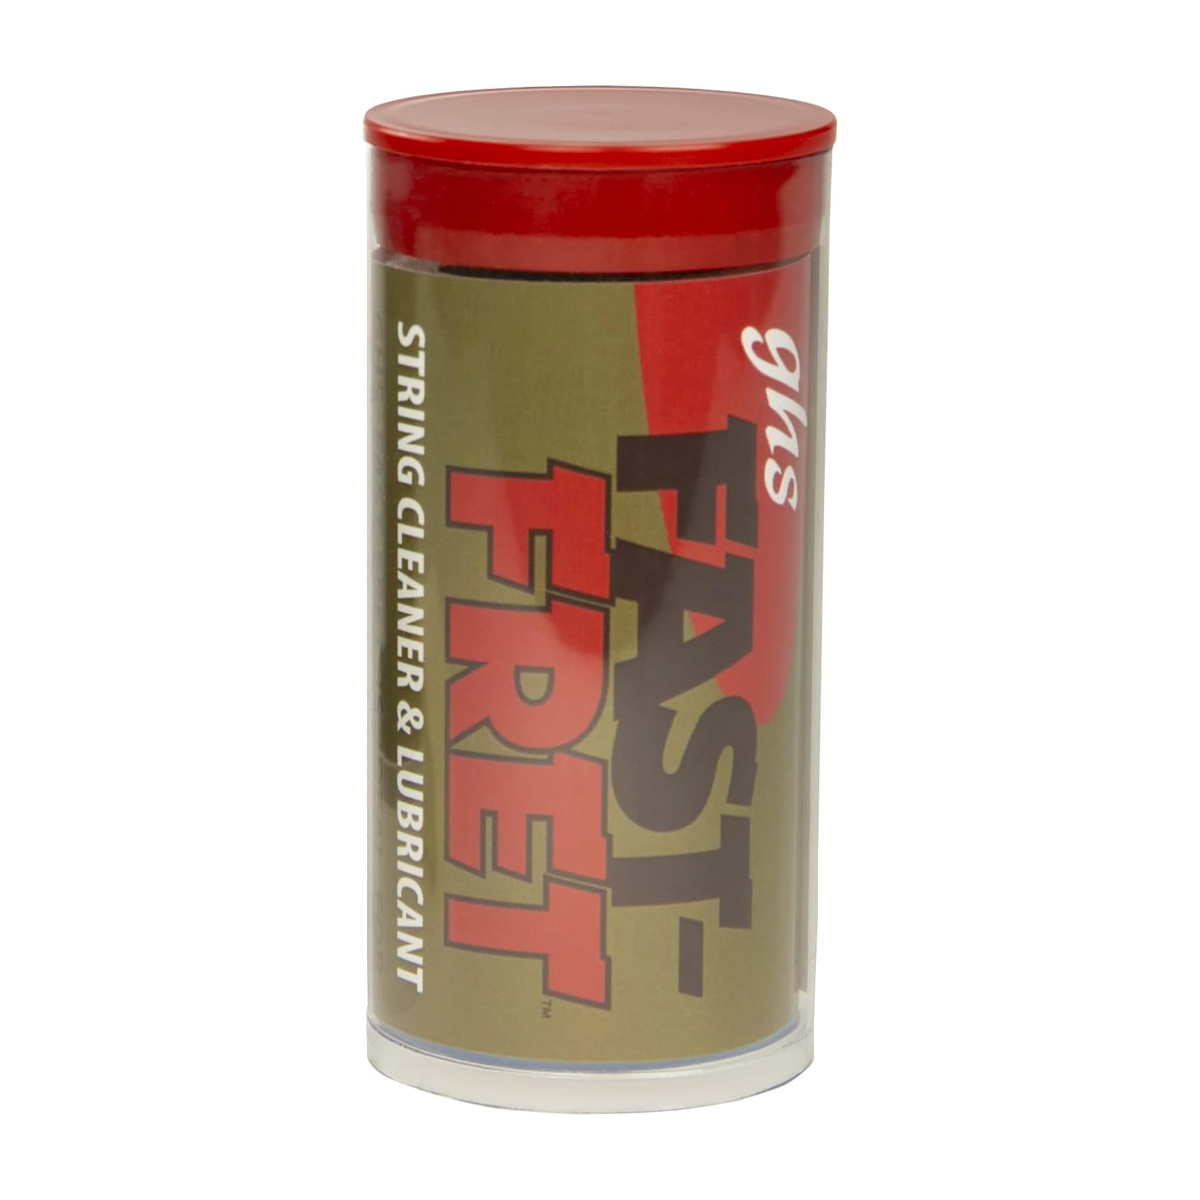 GHS Fast Fret String Cleaner & Lubricant